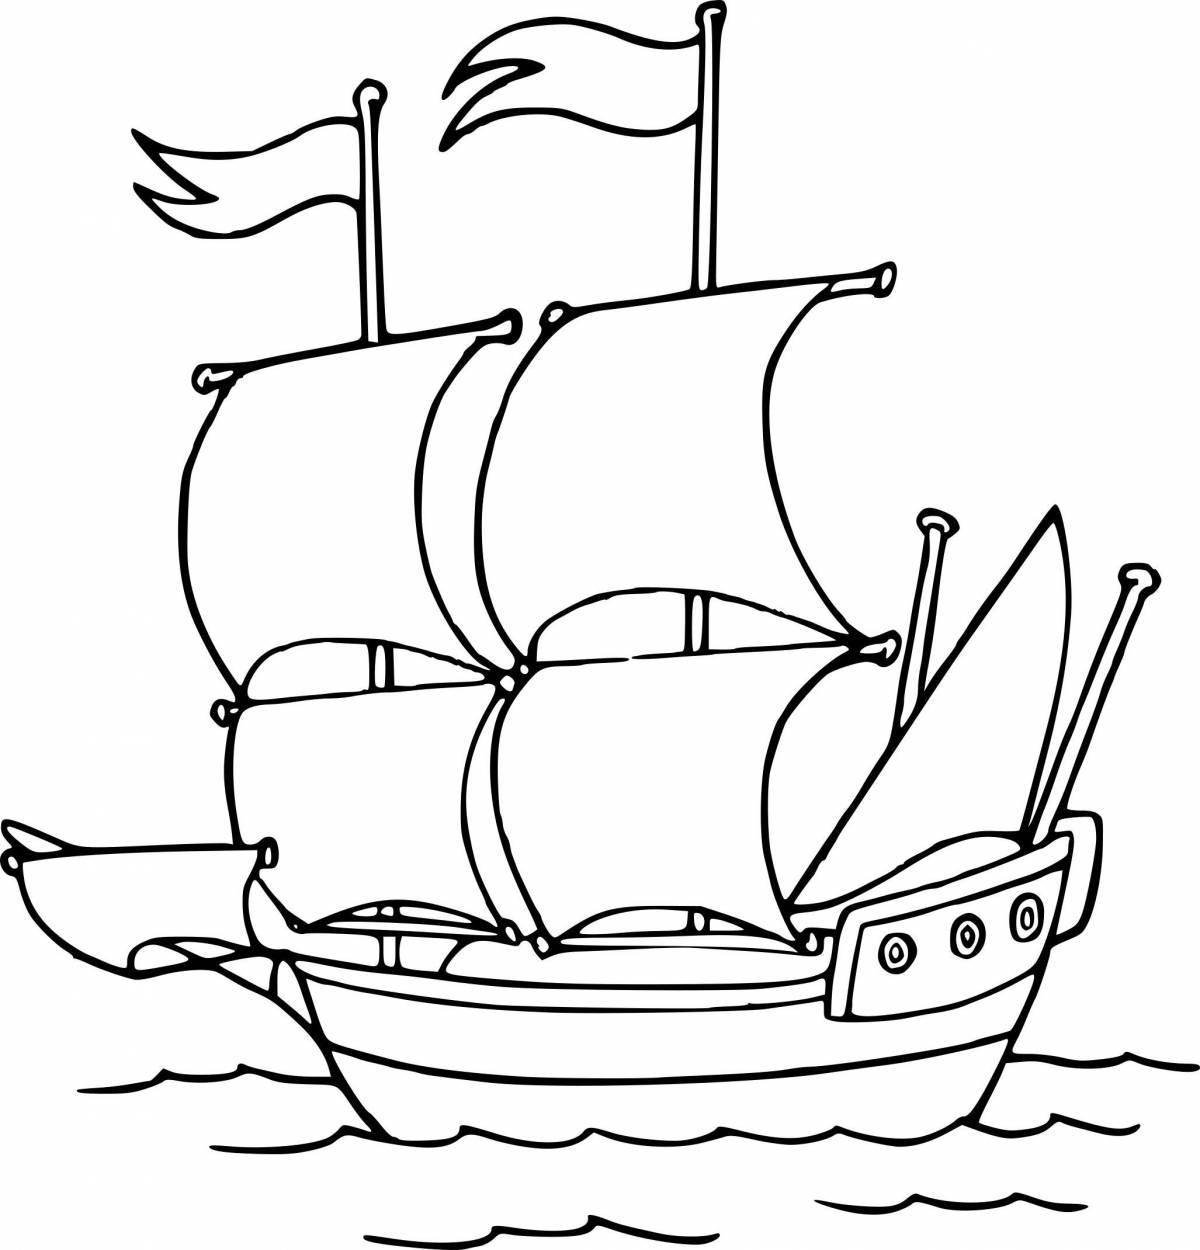 A fun boat coloring book for 5-6 year olds